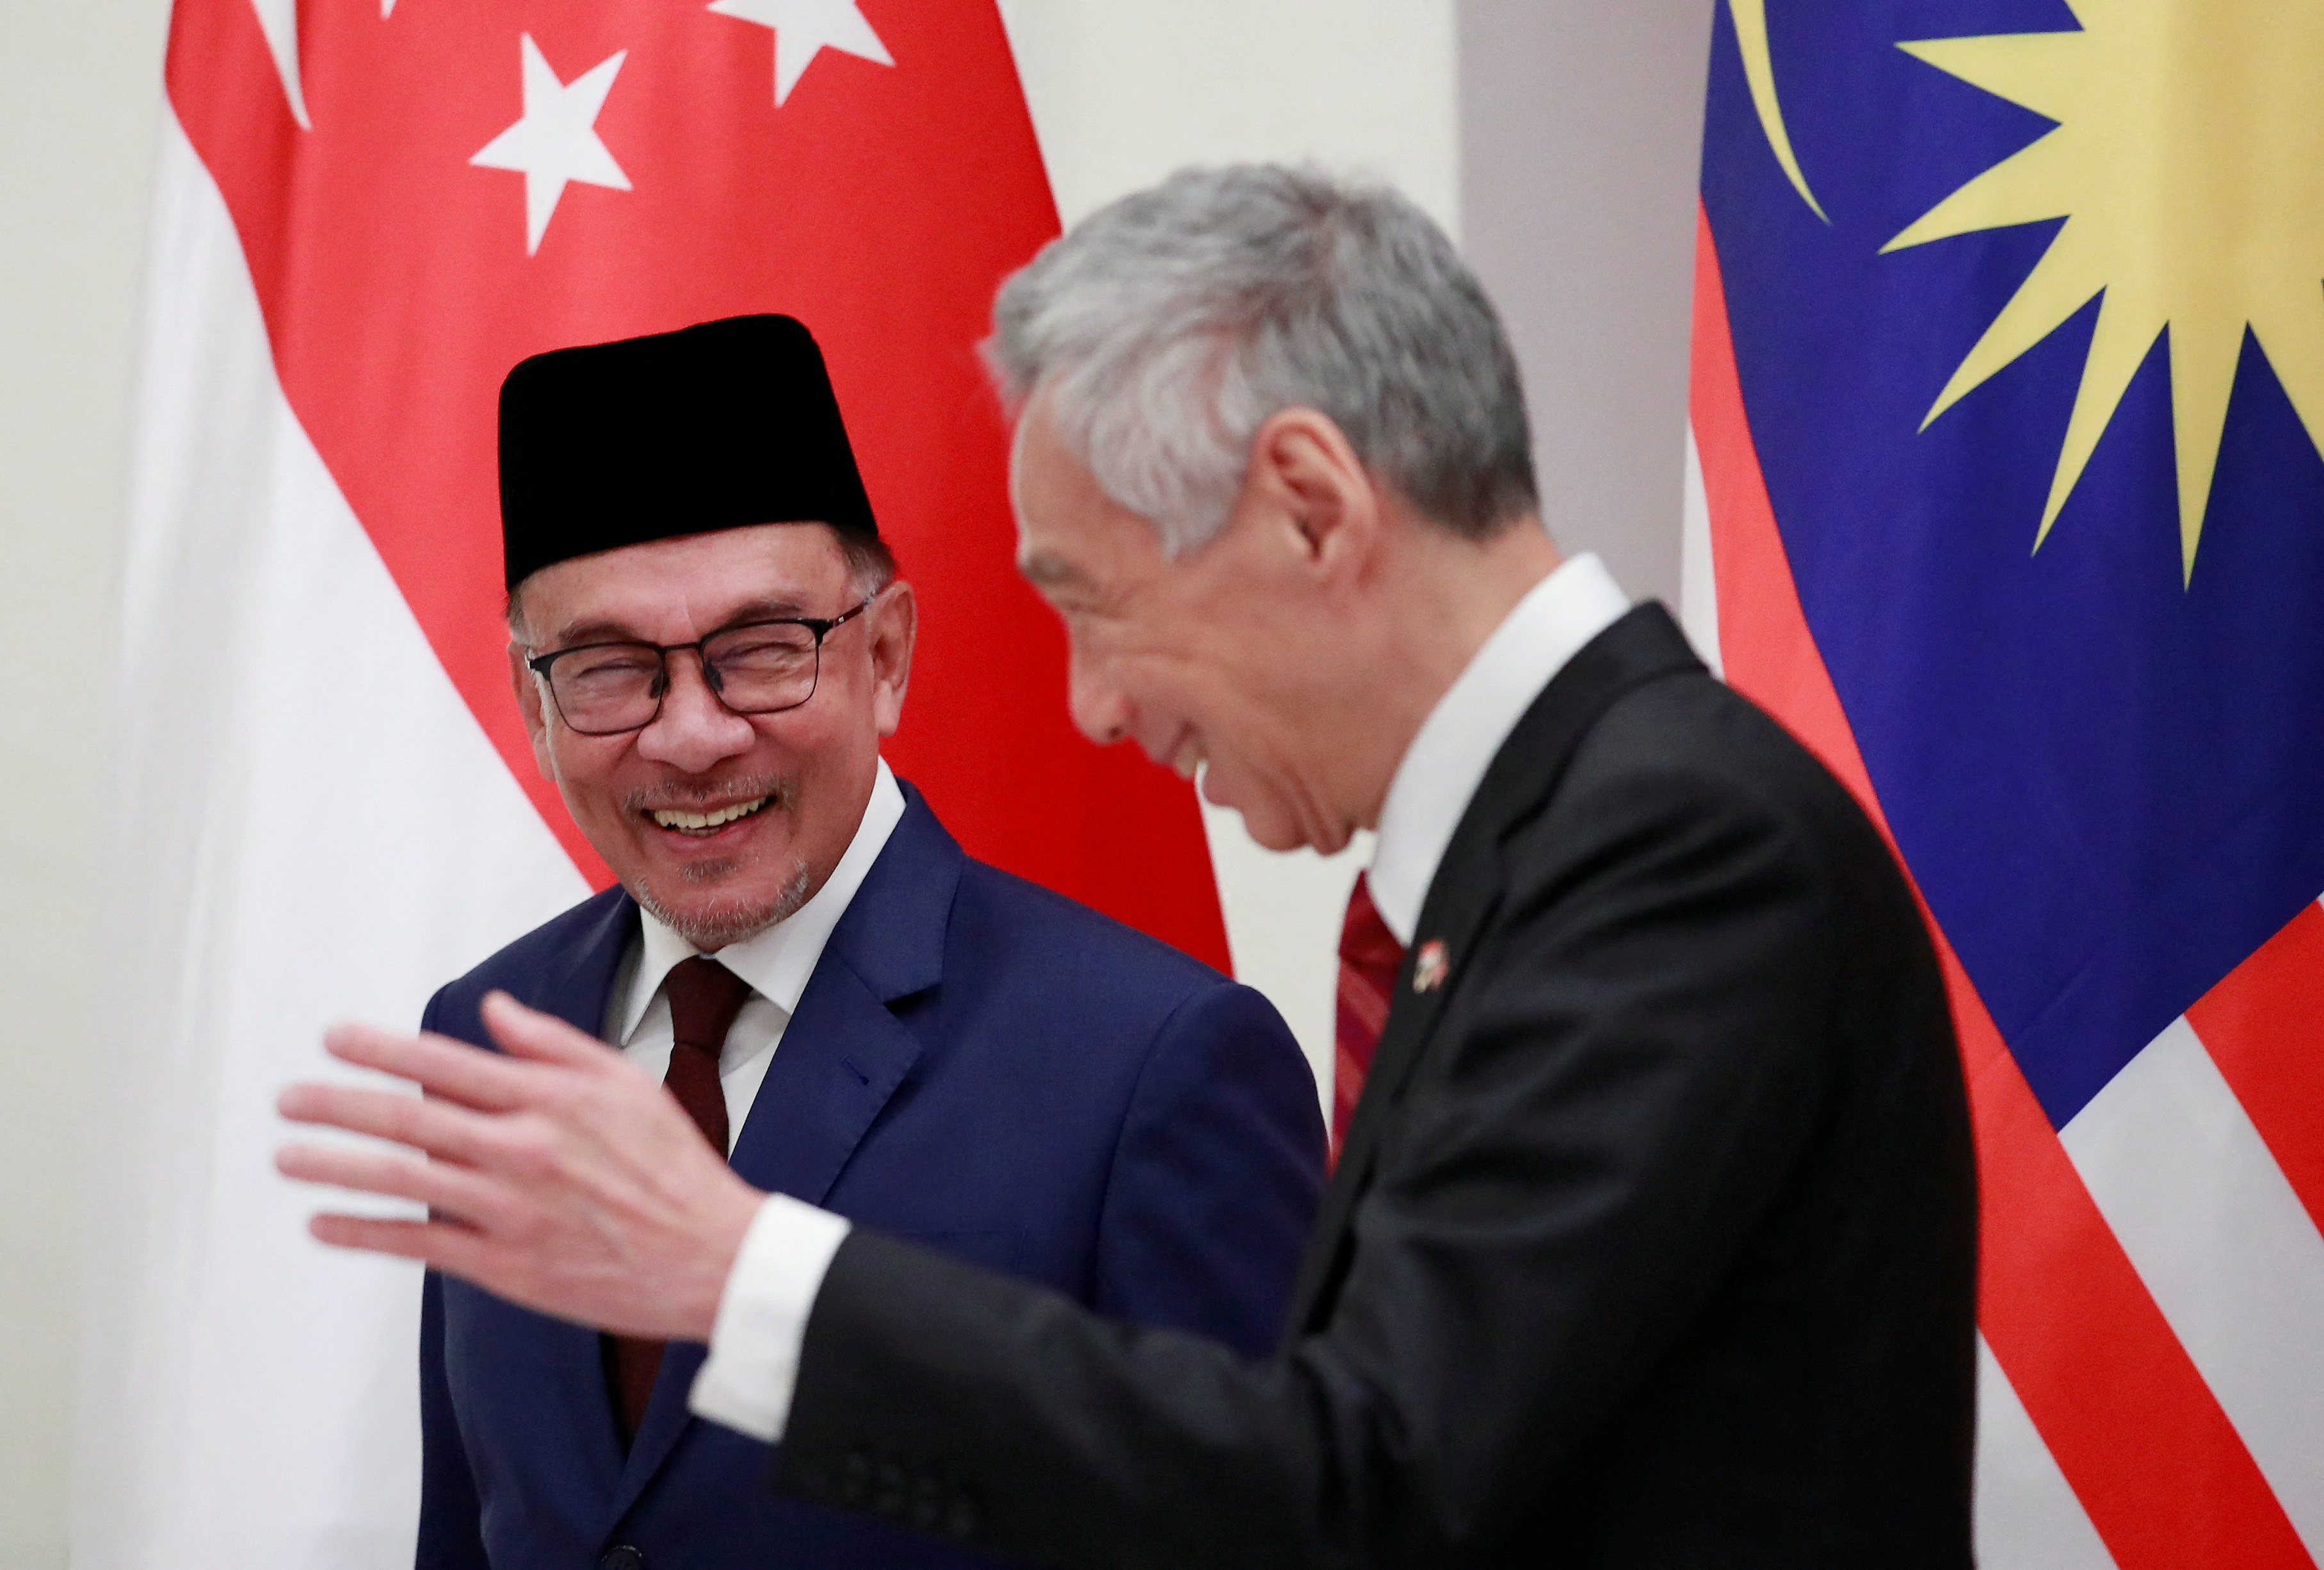 Singapore’s Prime Minister Lee Hsien Loong gestures to his Malaysian counterpart Anwar Ibrahim after a signing ceremony at the presidential palace in Singapore on January 30. Photo: Reuters